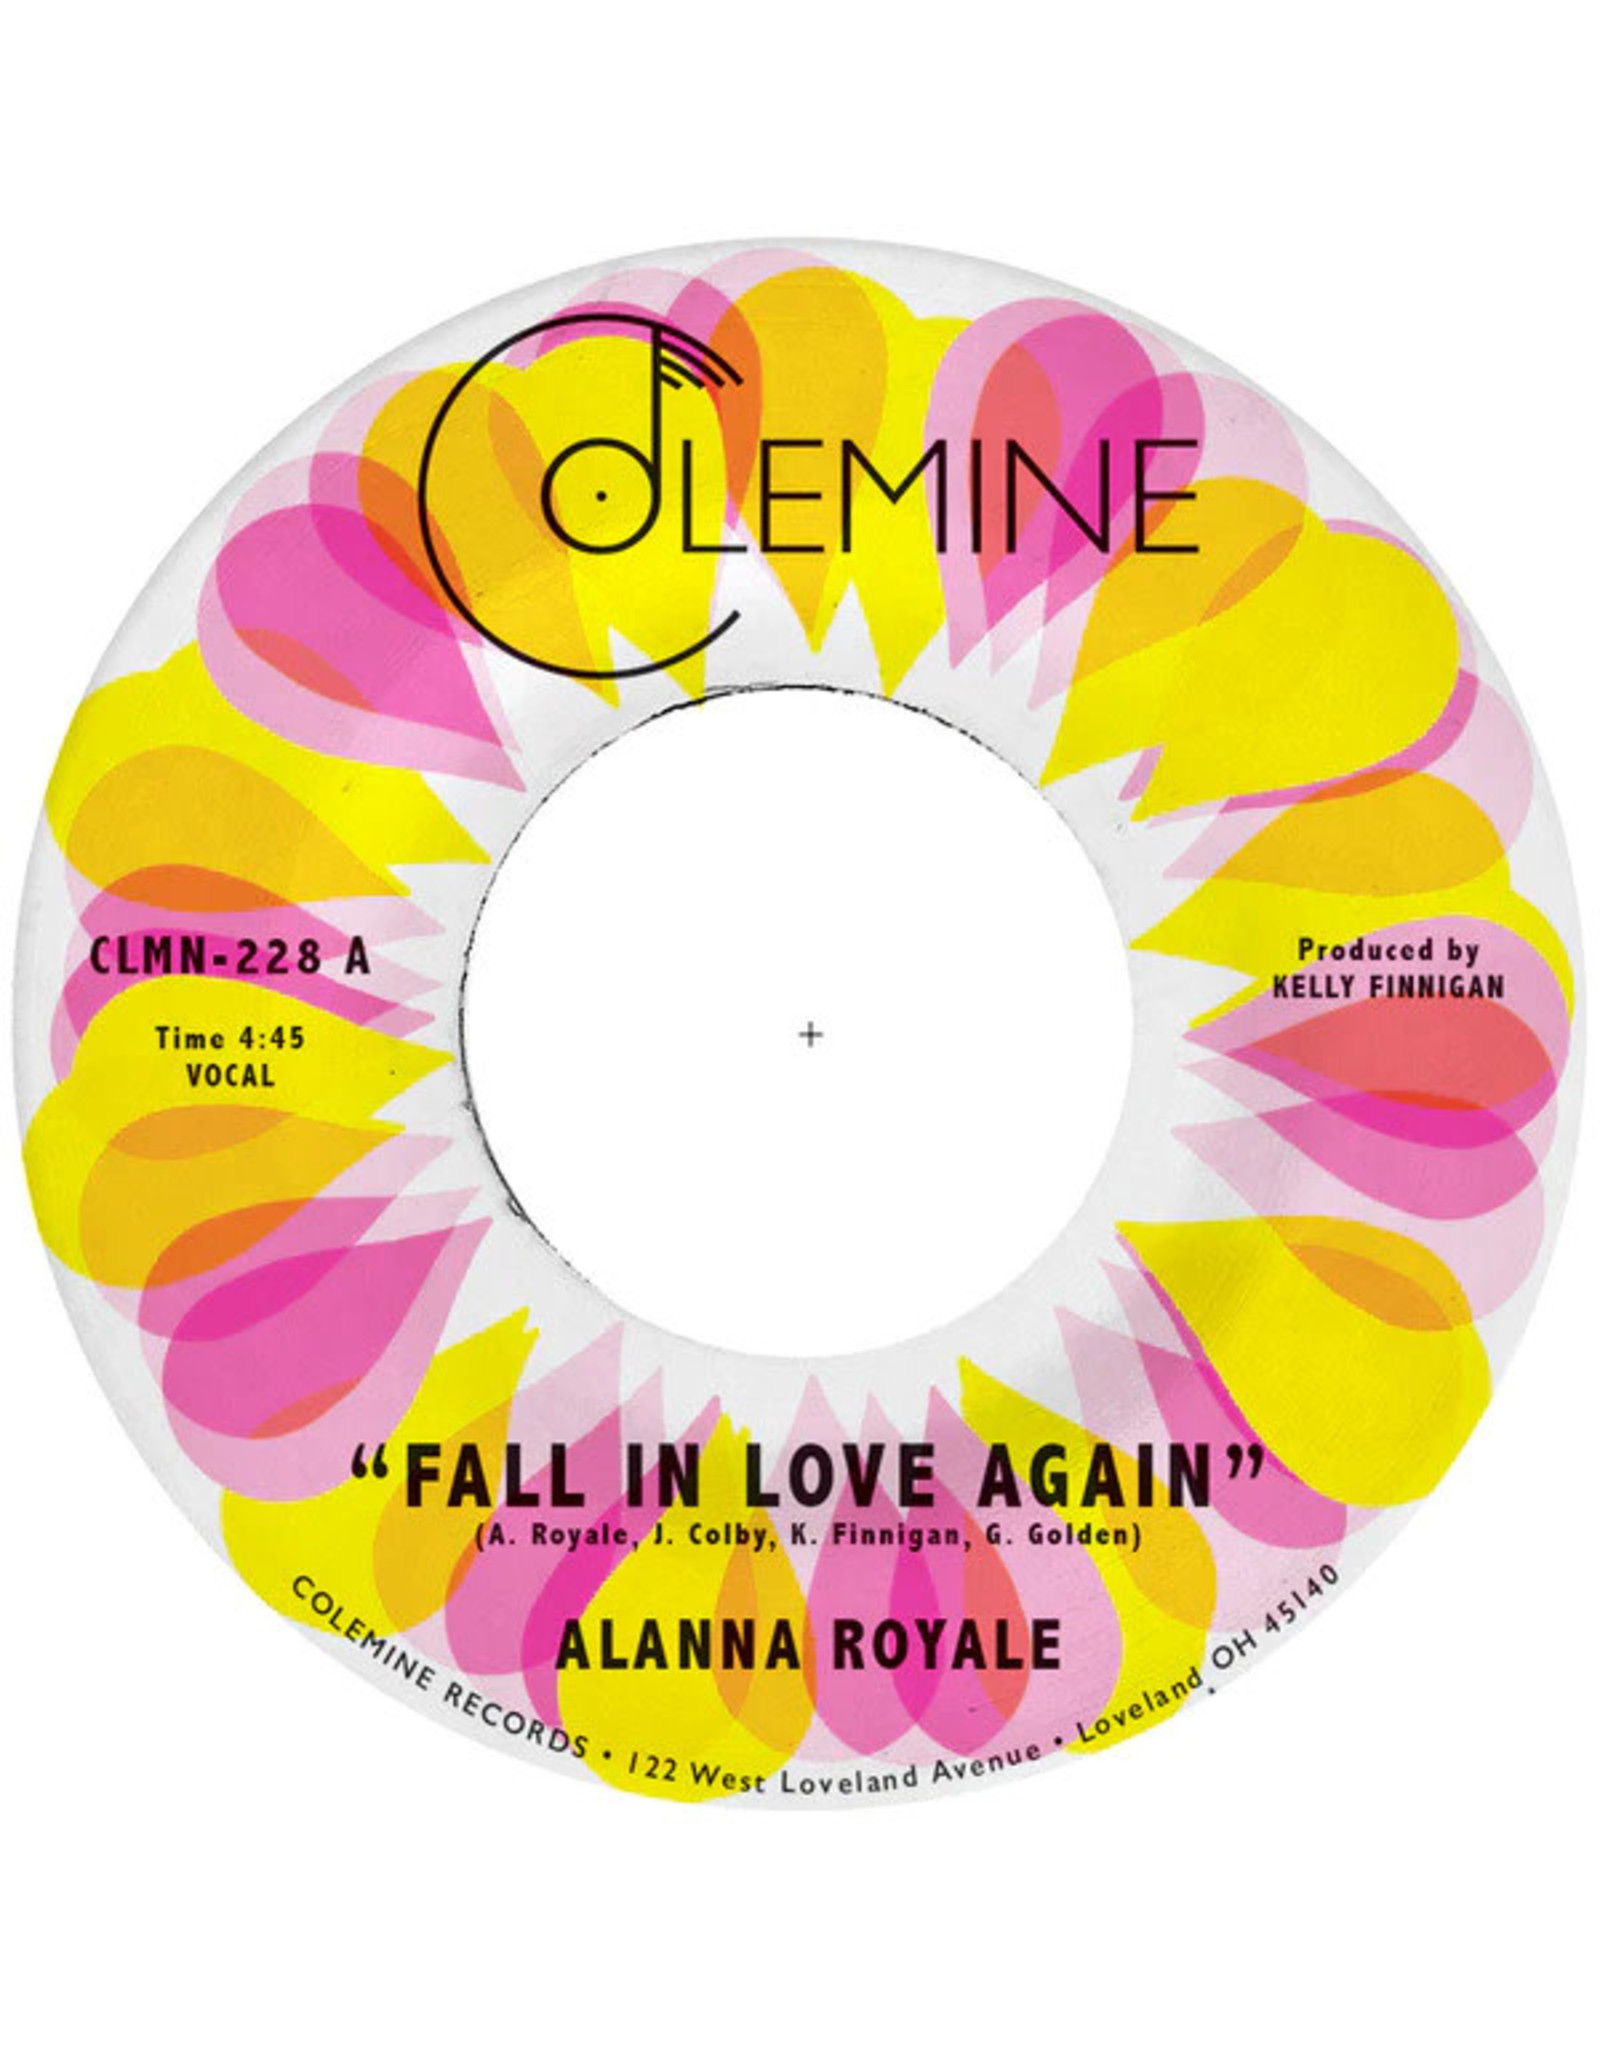 Colemine Royale, Alanna: Fall In Love Again (transparent pink) 7"